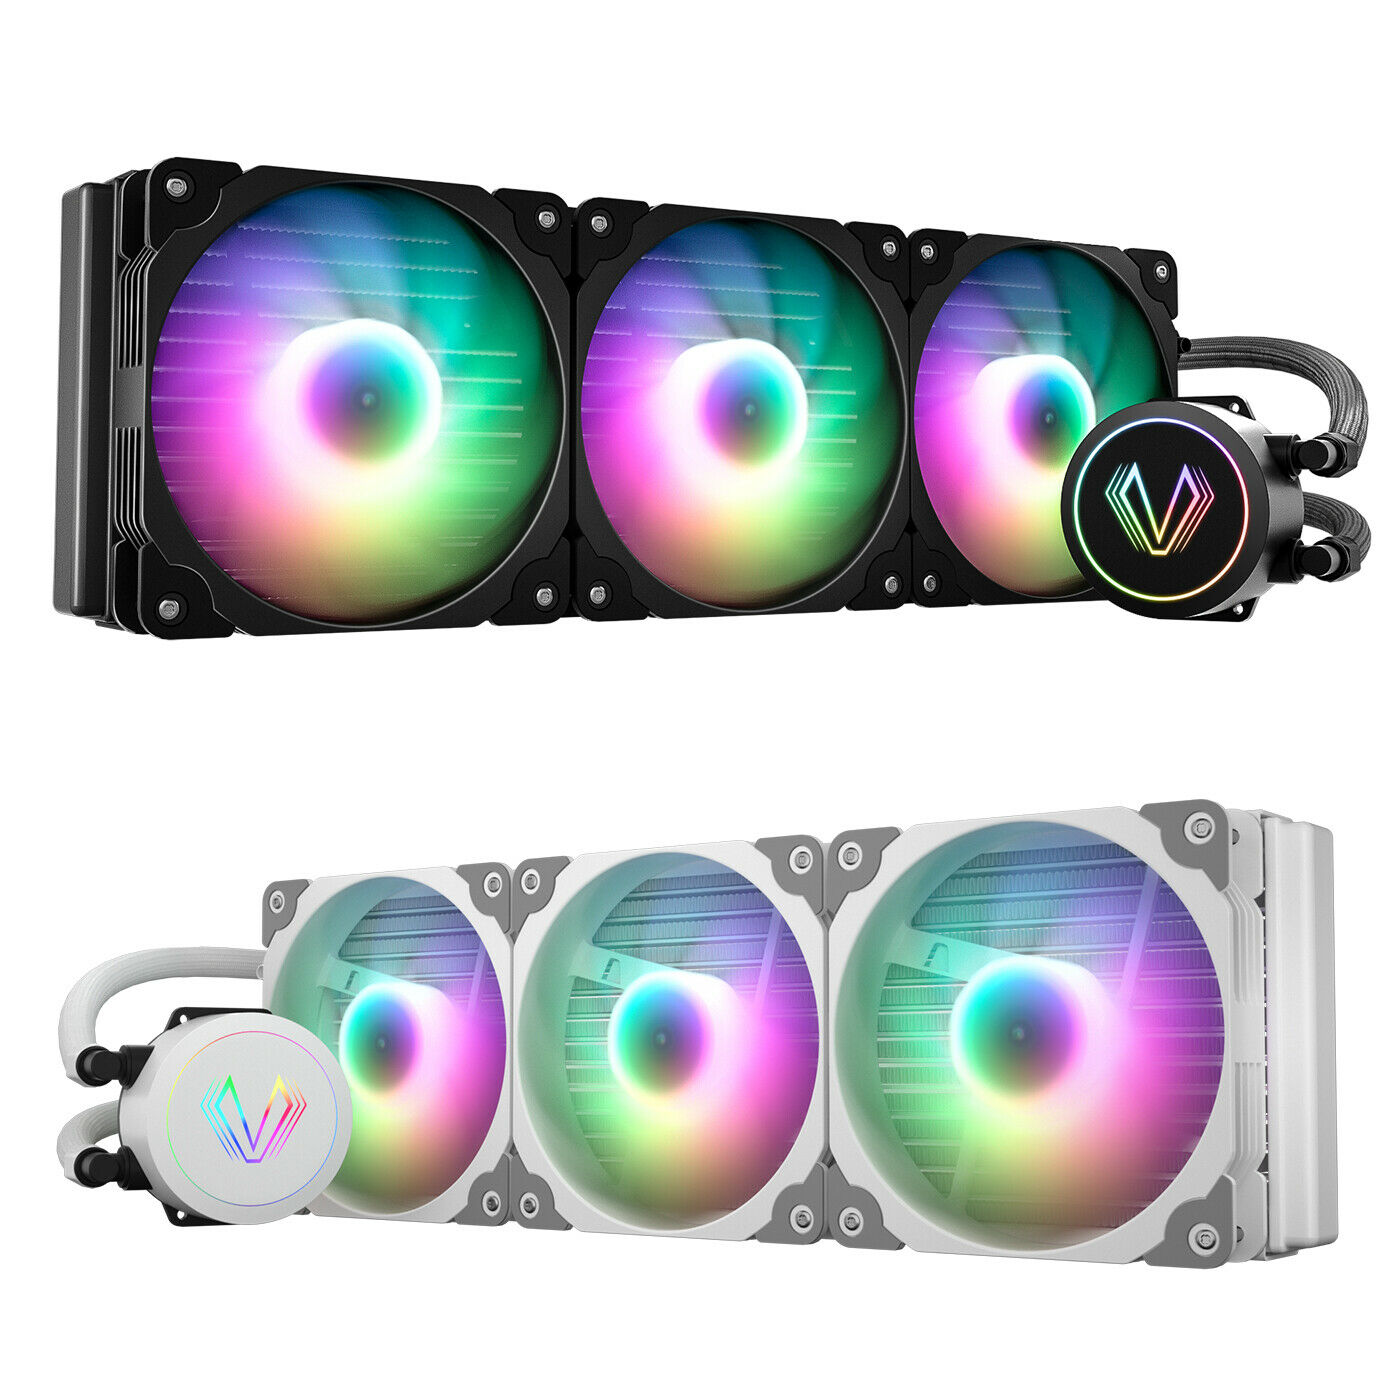 Vetroo V360mm Radiator Addressable RGB All-in-one AIO CPU Liquid Water Cooler